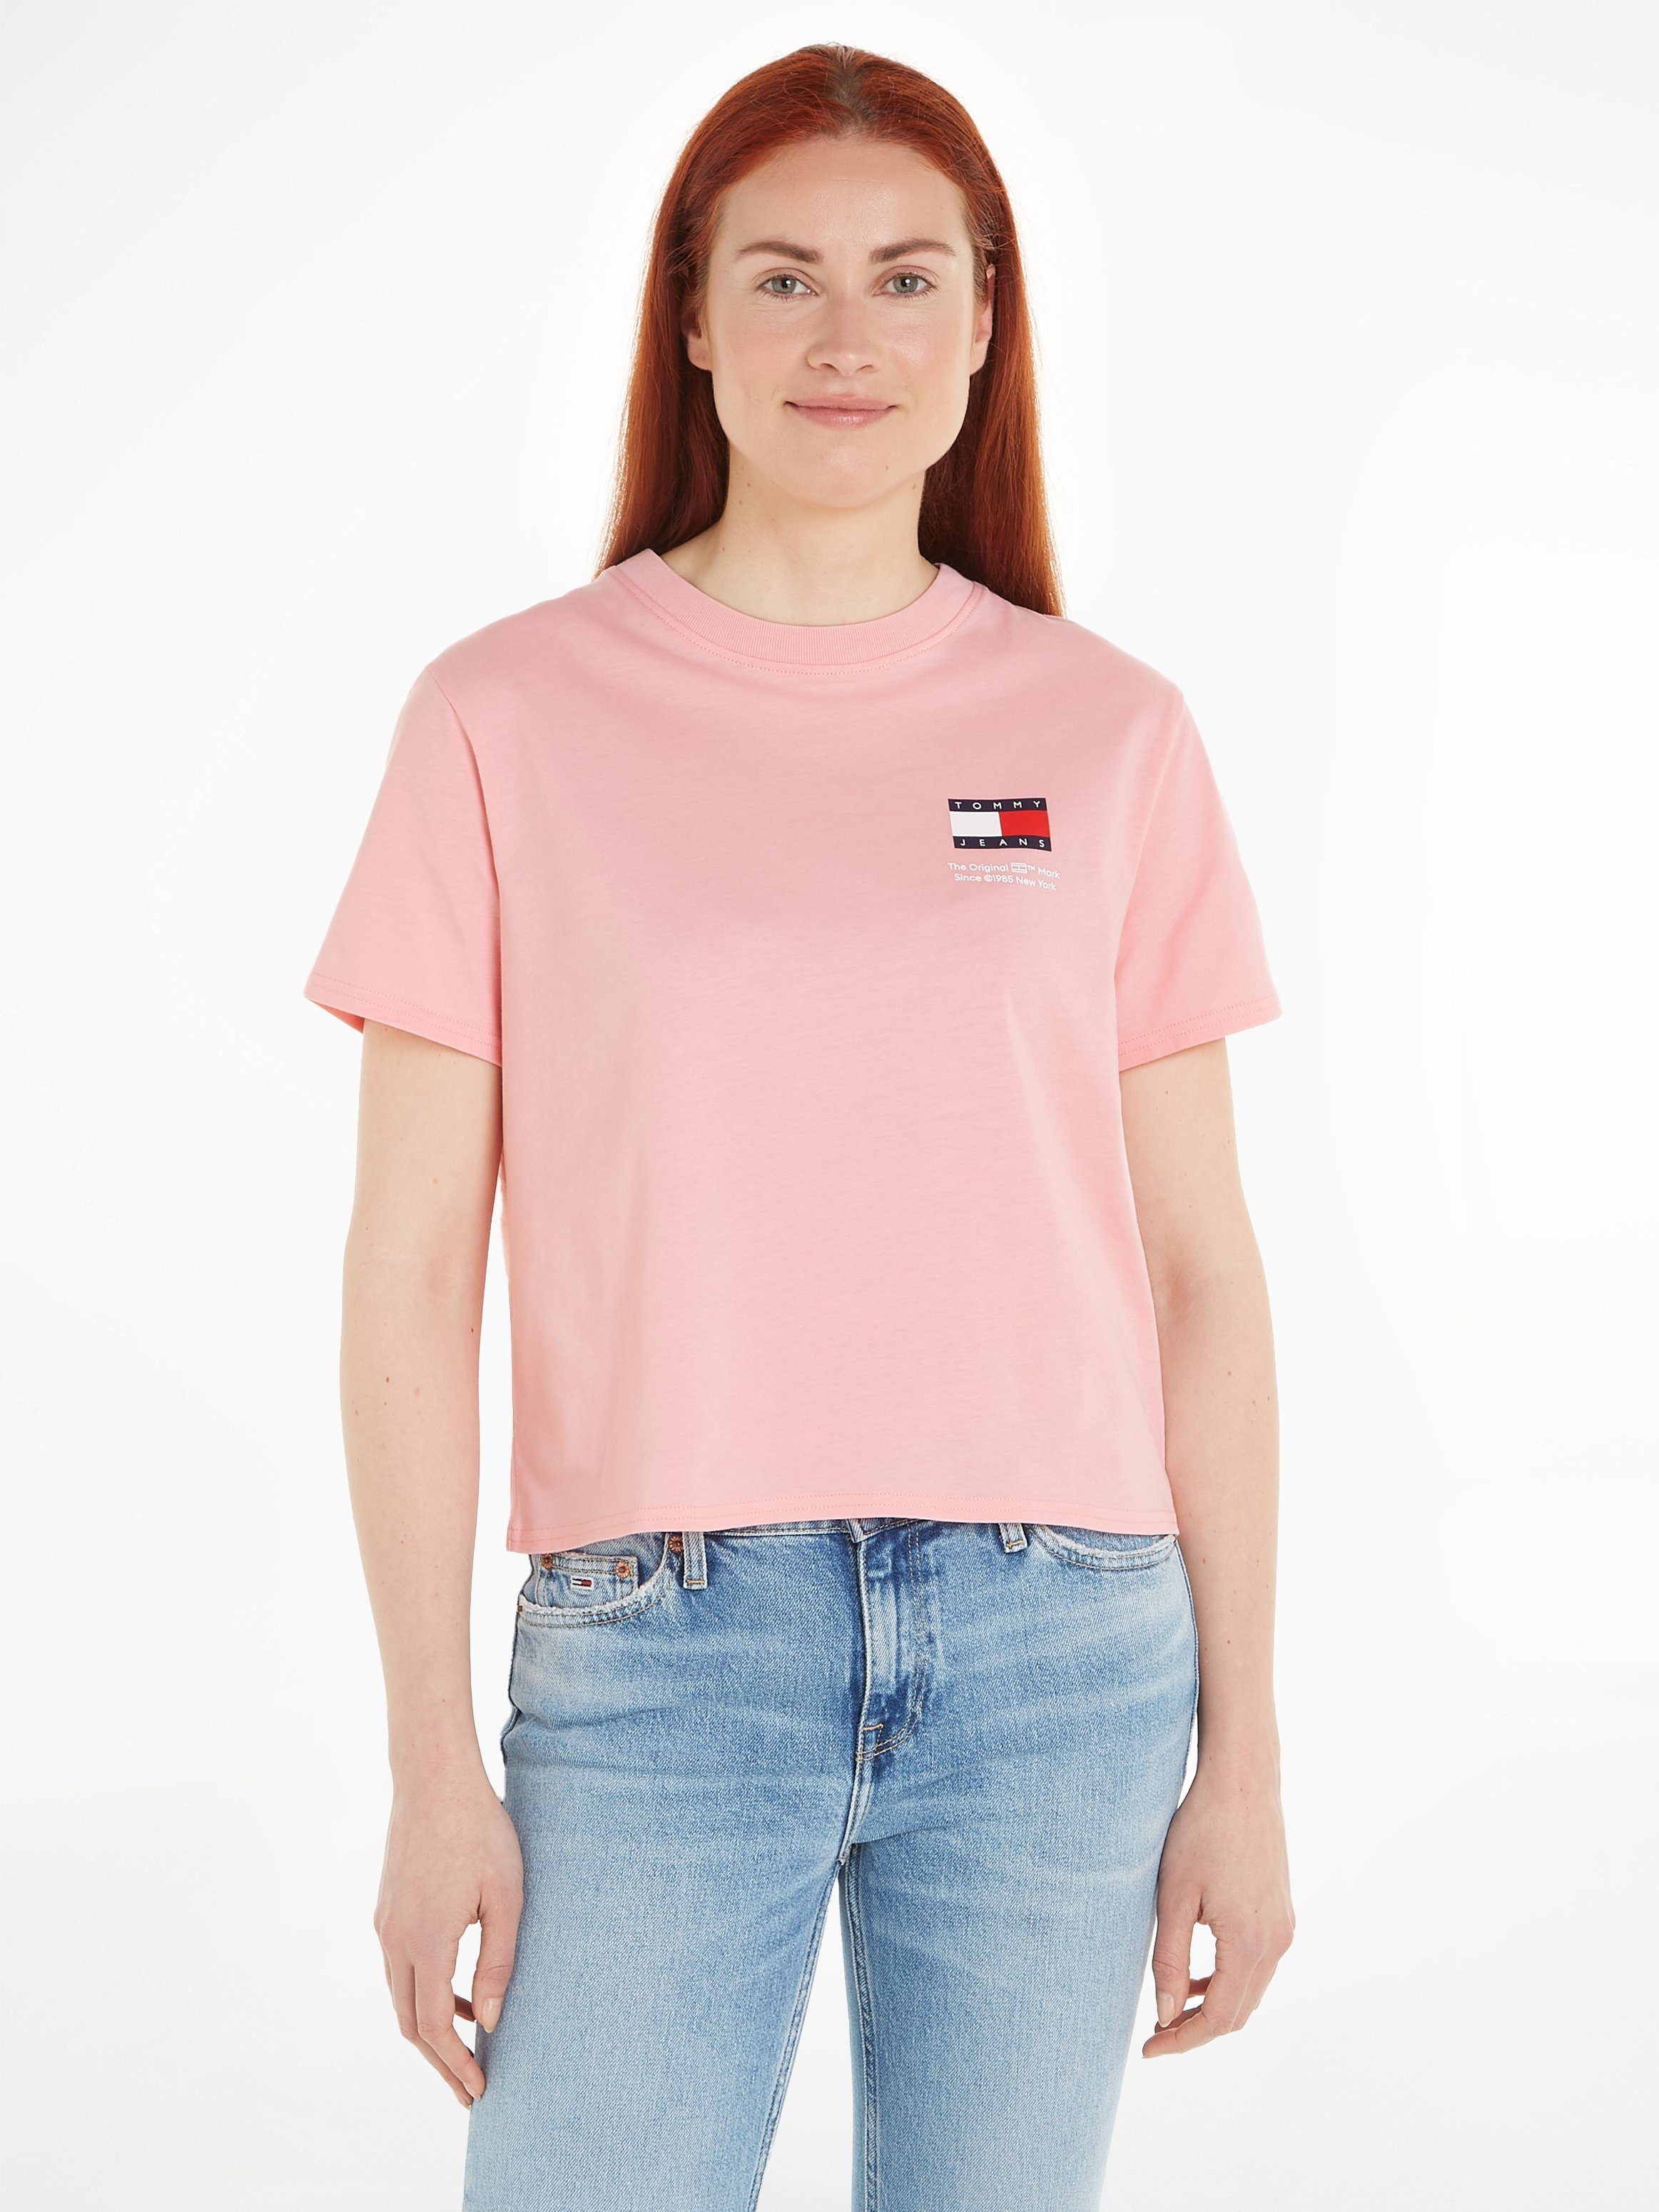 GRAPHIC mit Jeans TEE BXY TJW Markenlabel T-Shirt Tommy FLAG